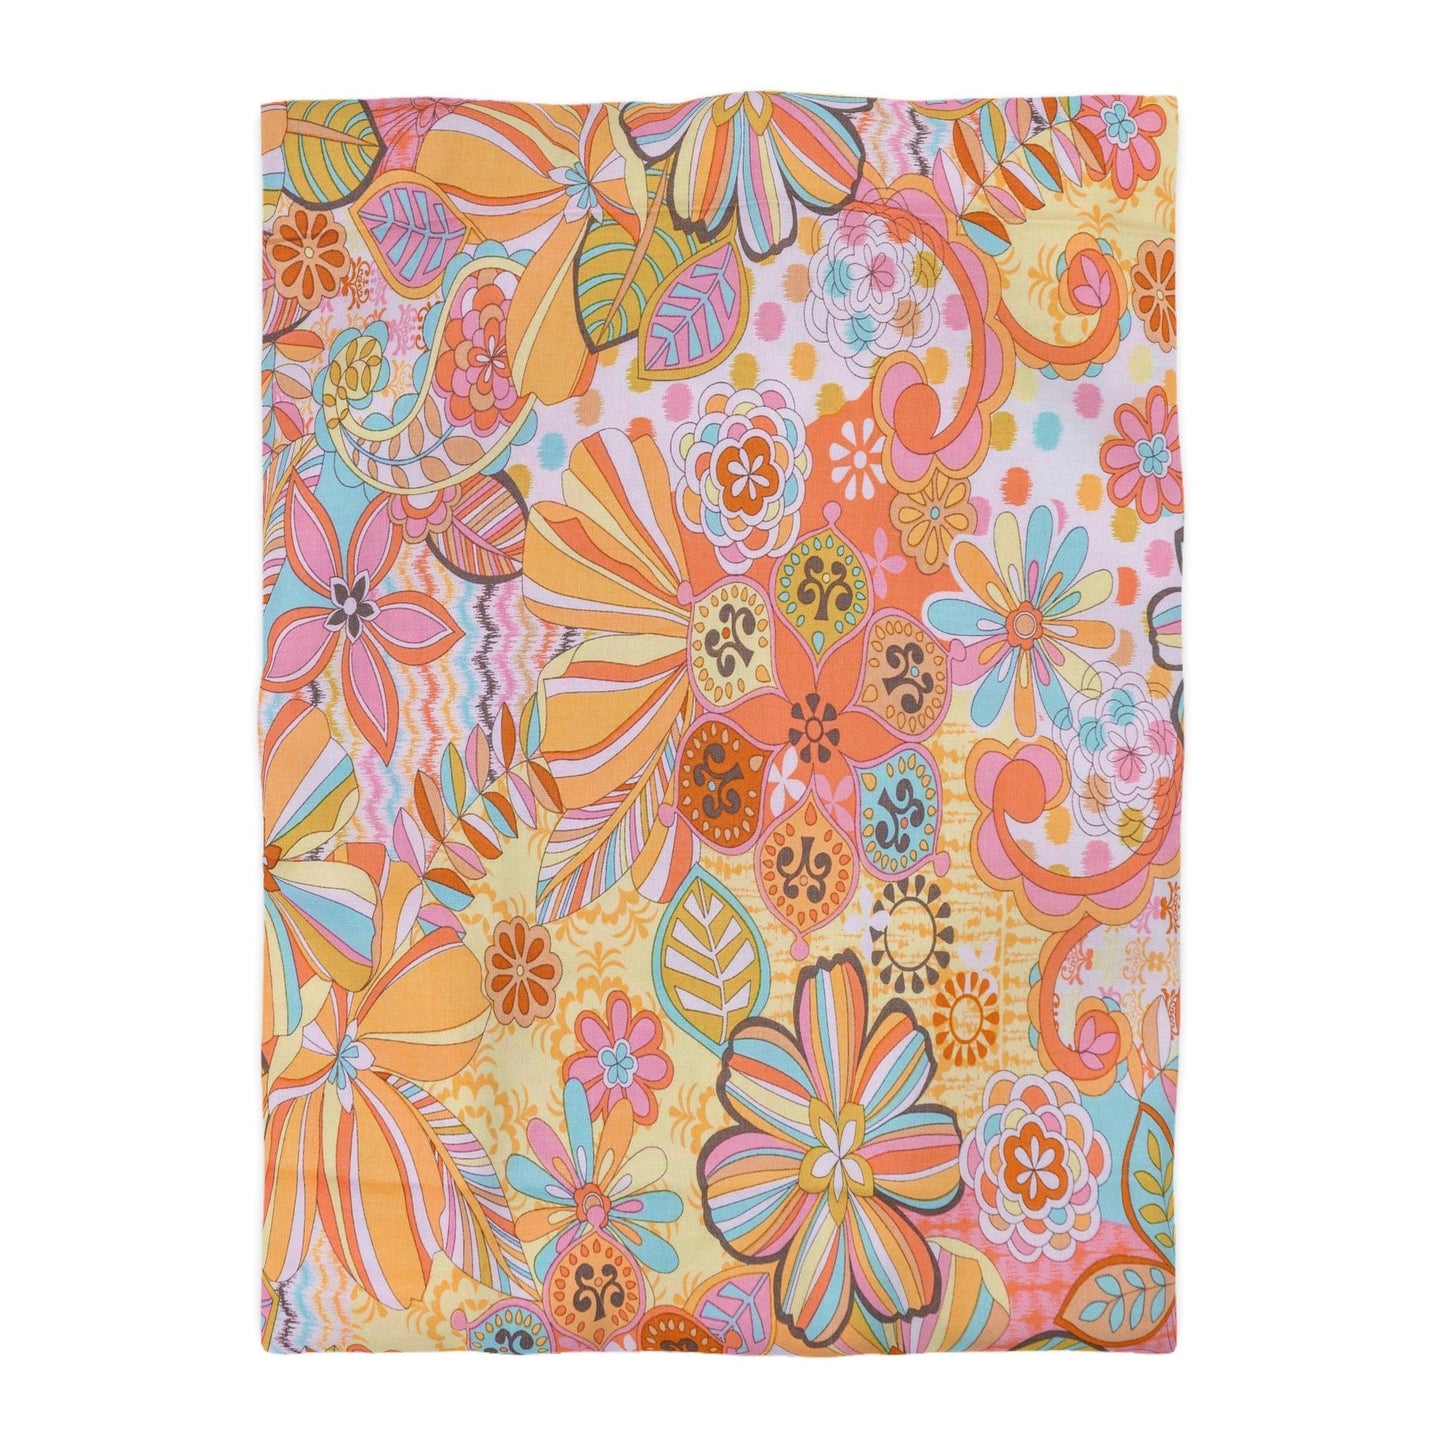 Kate McEnroe New York Retro Trippy Flower Power Duvet Cover, 70s Mid Mod Hippie Chic Floral Bedroom Decor with Groovy Orange, Yellow, and Blue Palette Duvet Covers Twin XL / White 26323424880278798214